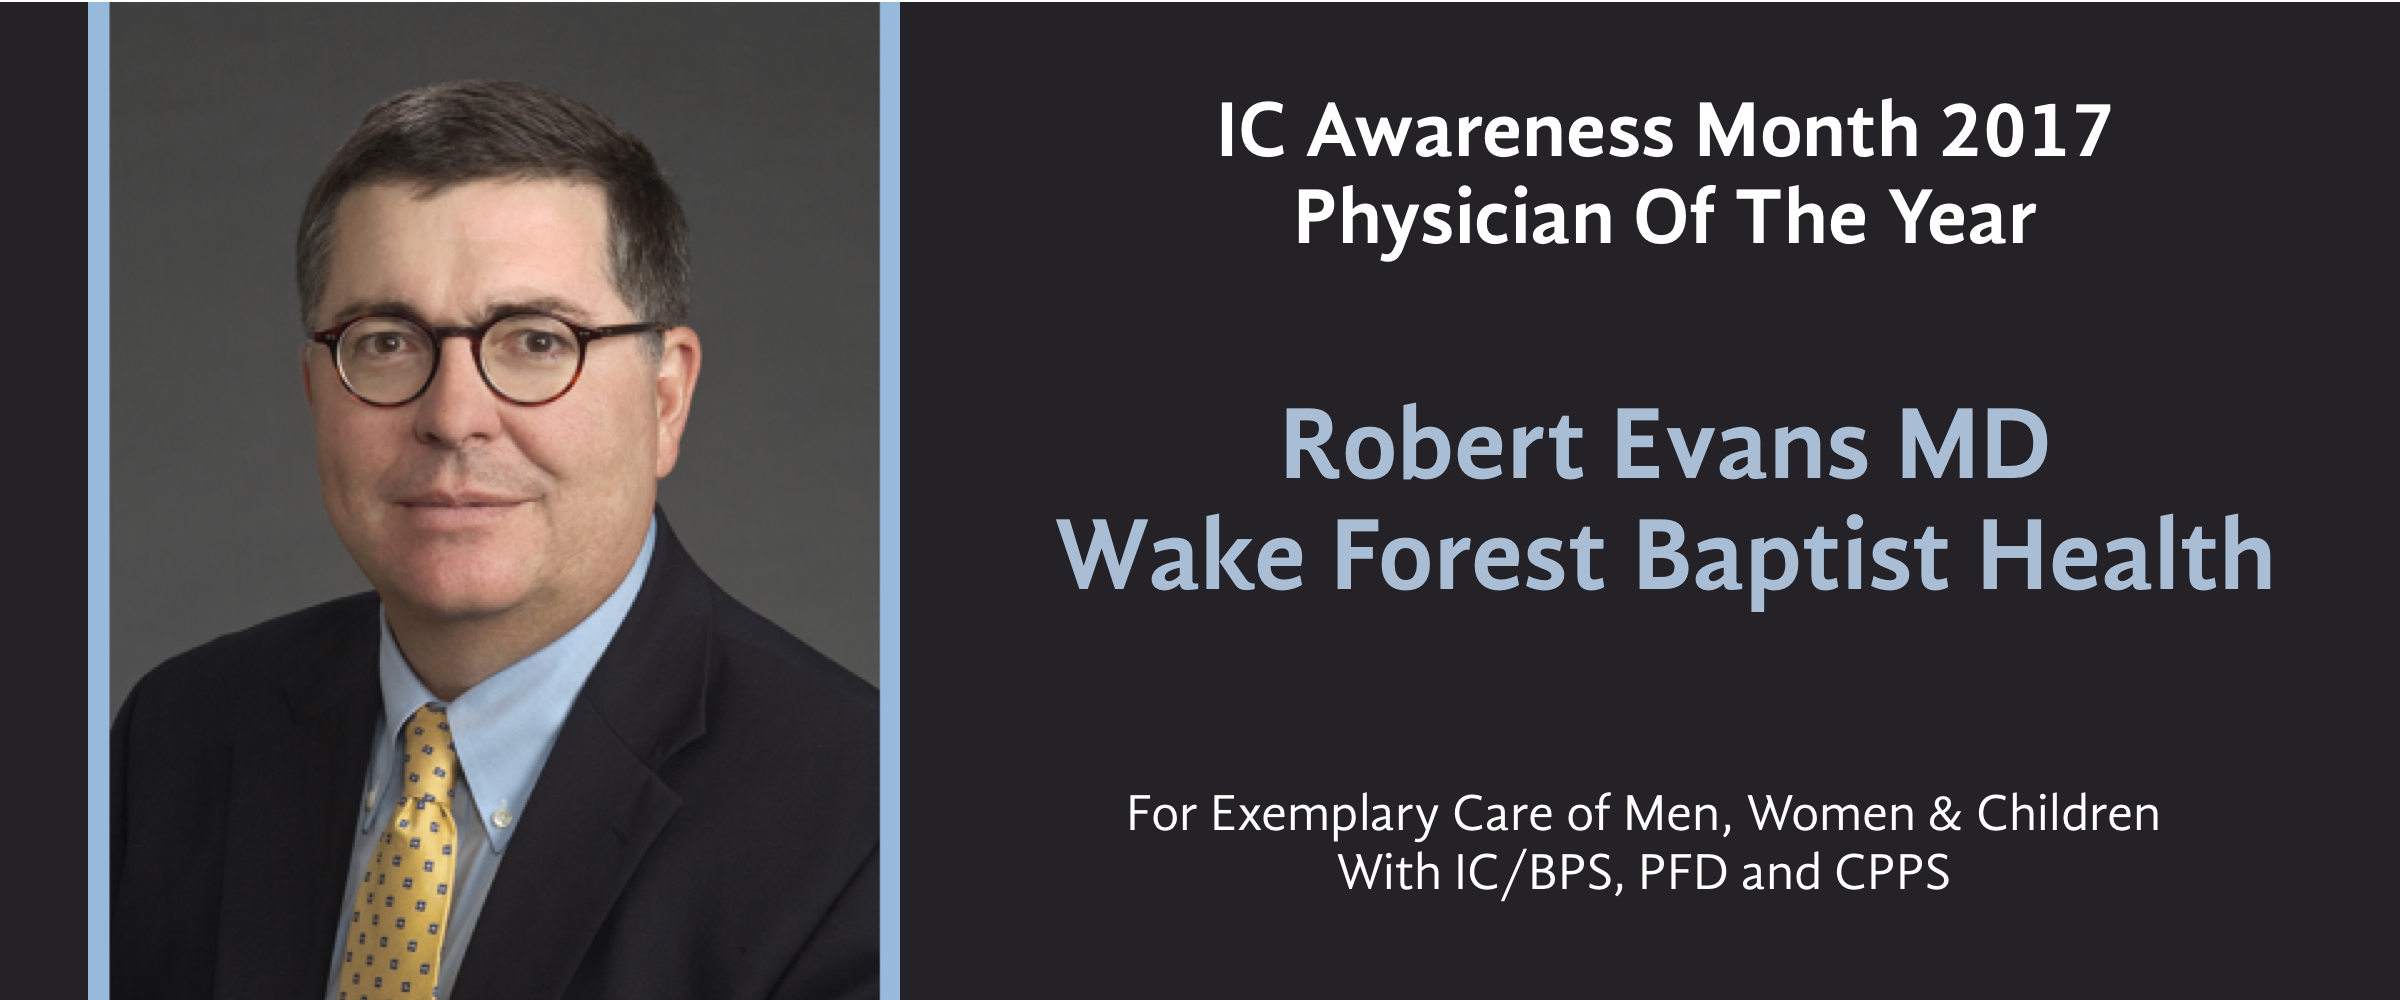 Dr. Robert Evans MD - 2017 Physician of the Year